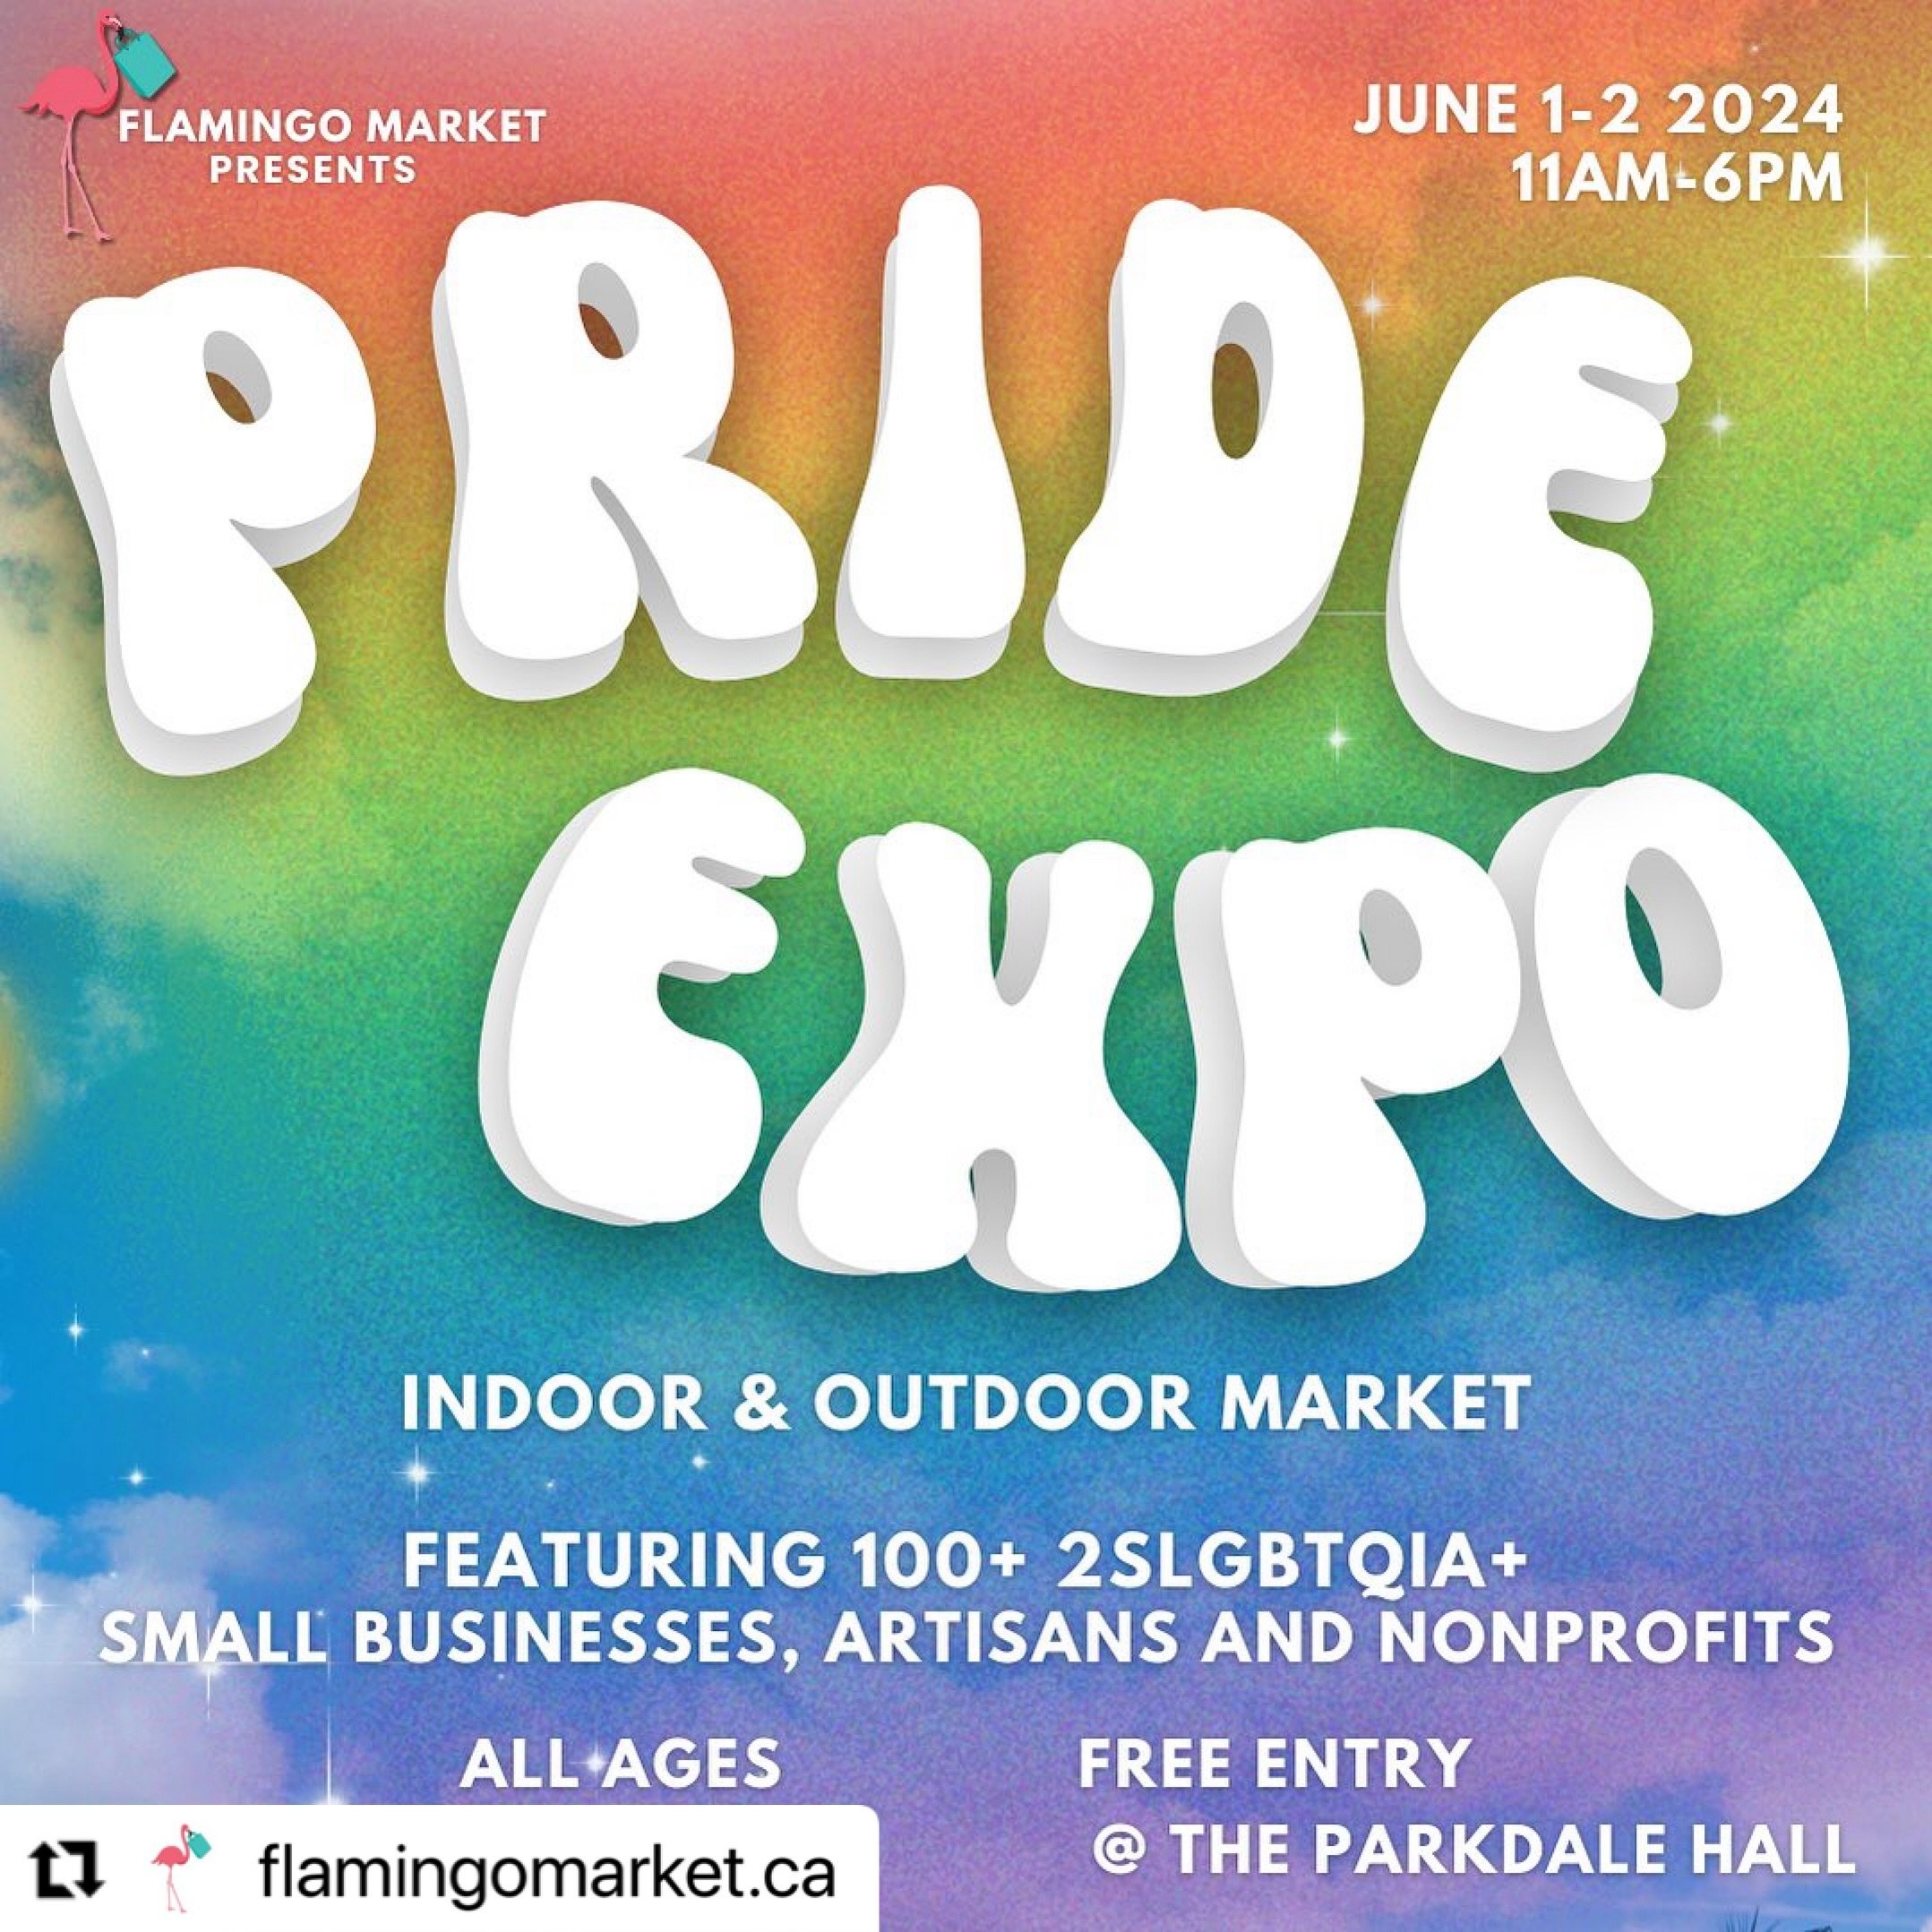 I&rsquo;ll be vending Sunday June 2nd at the Flamingo Market @theparkdalehall 🦩🌈 Pride edition! Come check out over 100 2SLGBTQIA+ artists and vendors from 11am-6pm. Including me 🥳

More info @flamingomarket.ca 💕